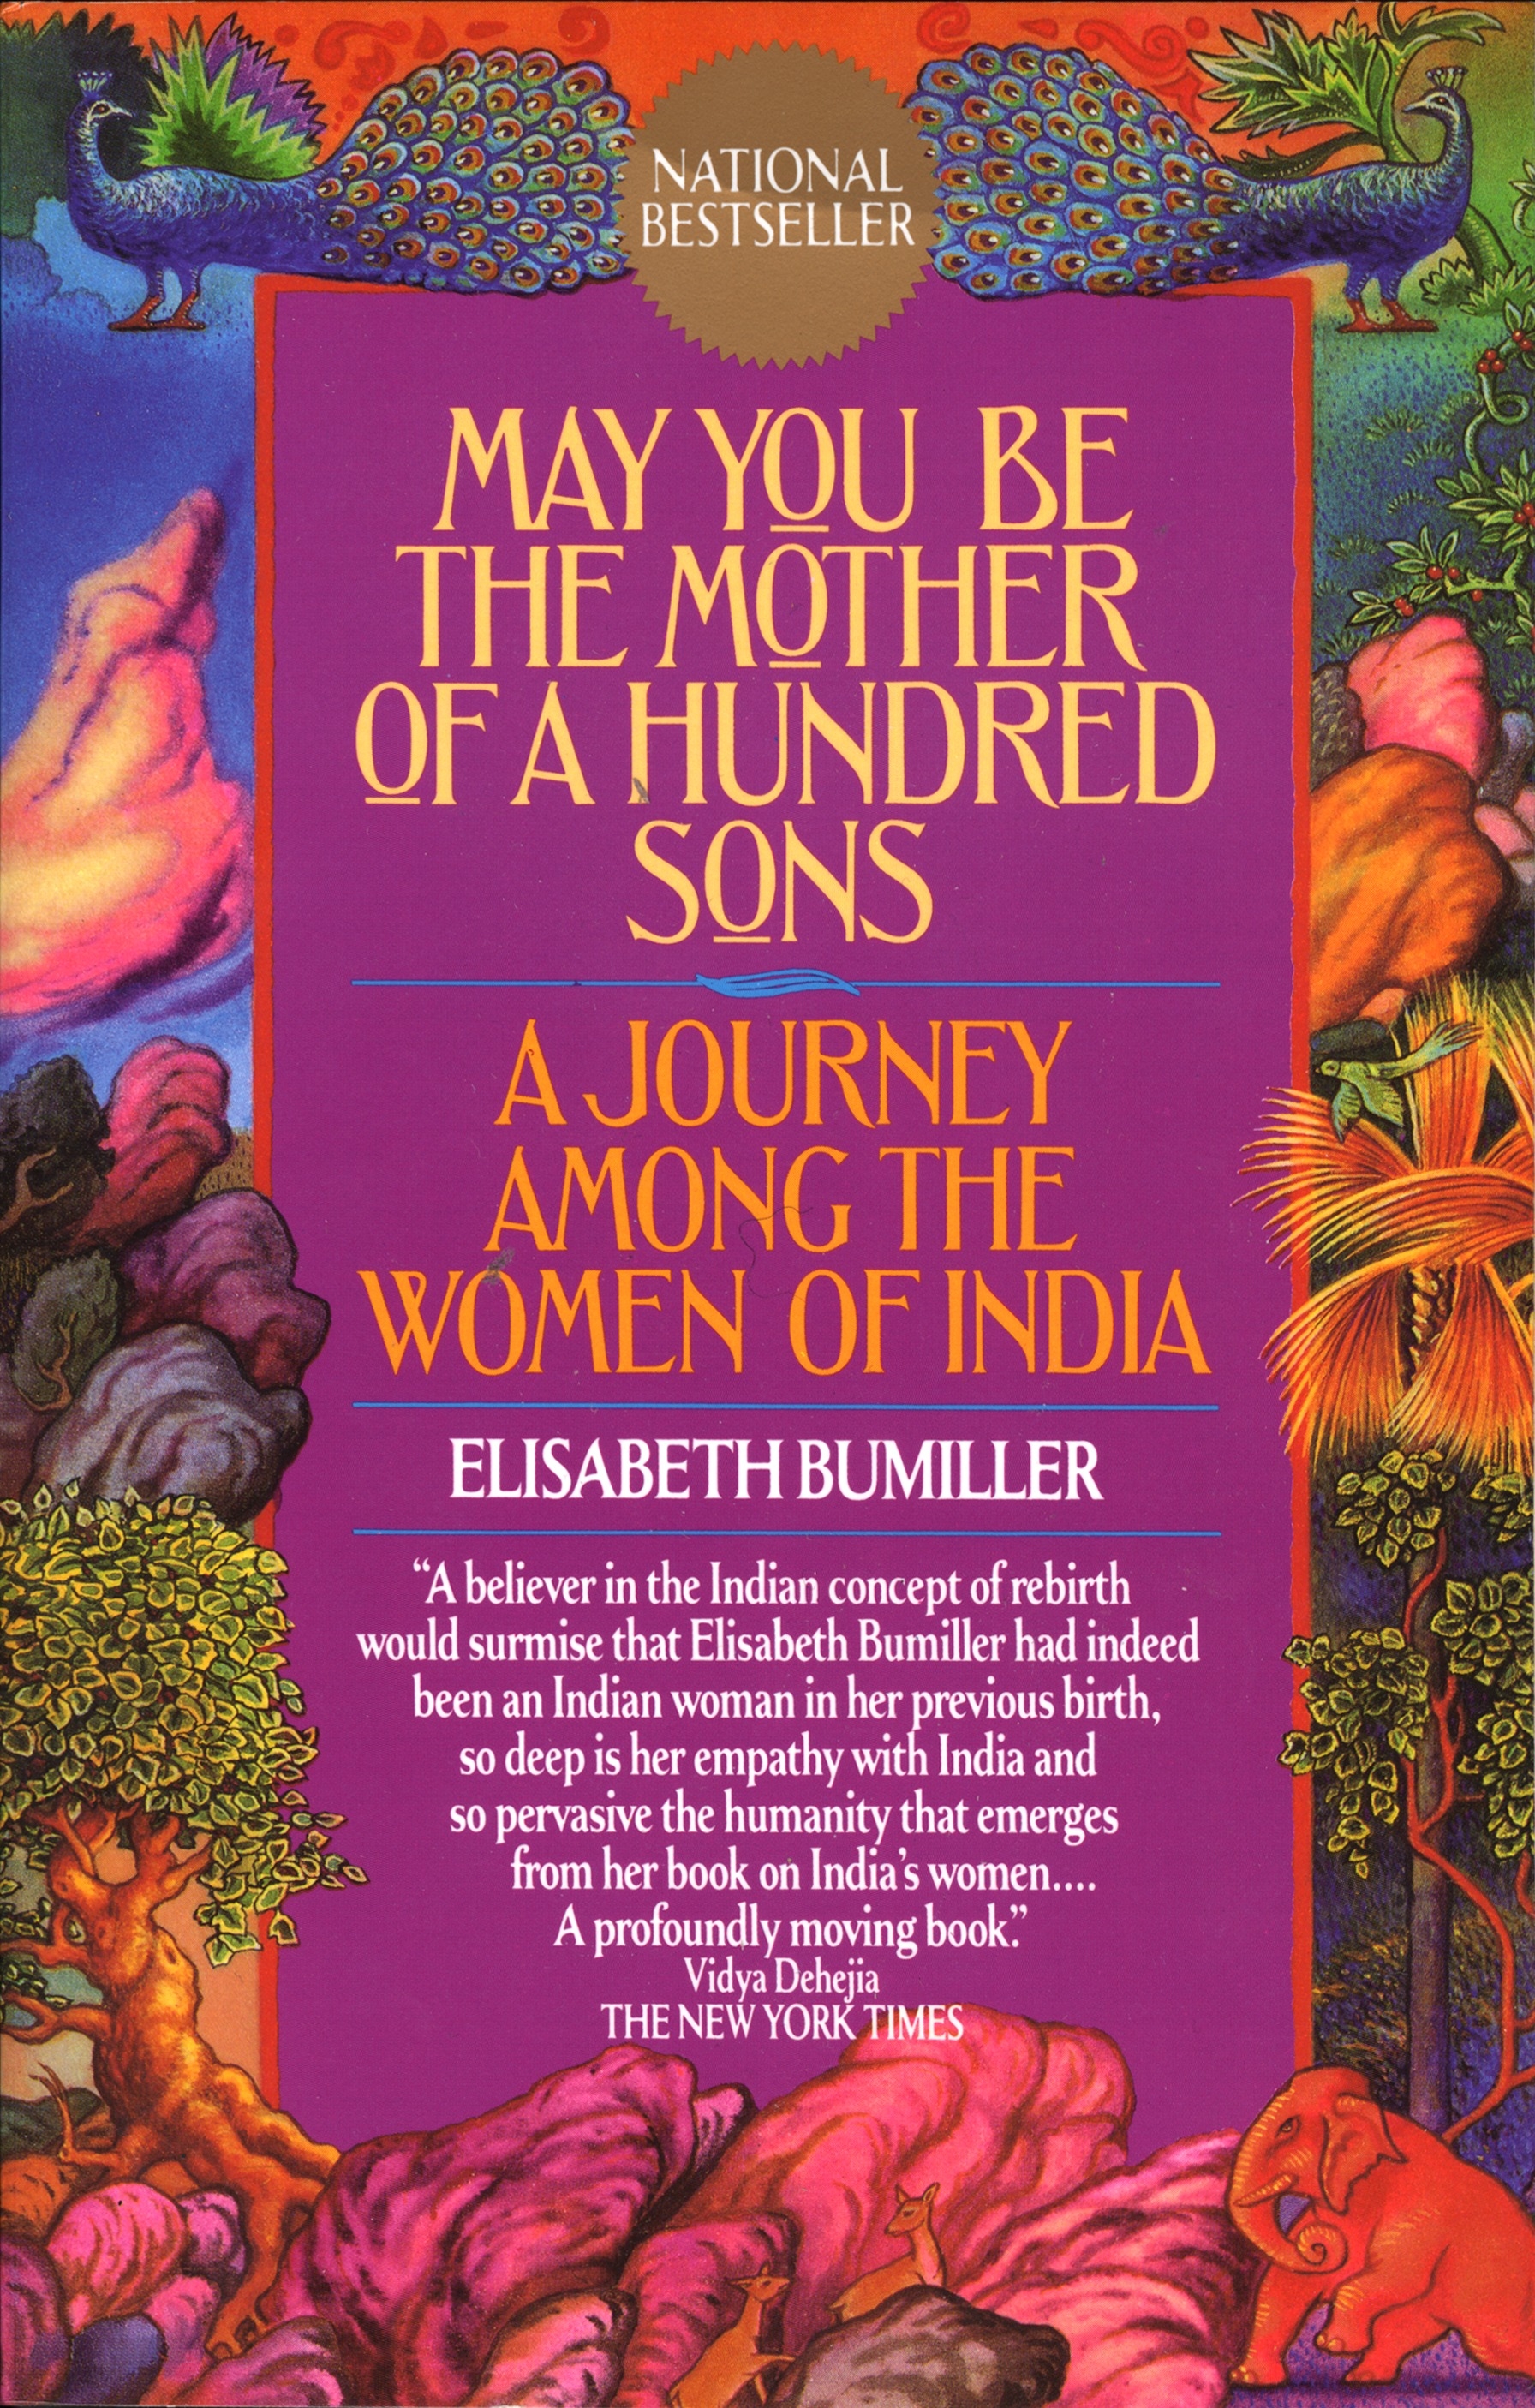 May You Be The Mother Of 100 Sons by Elisabeth Bumiller